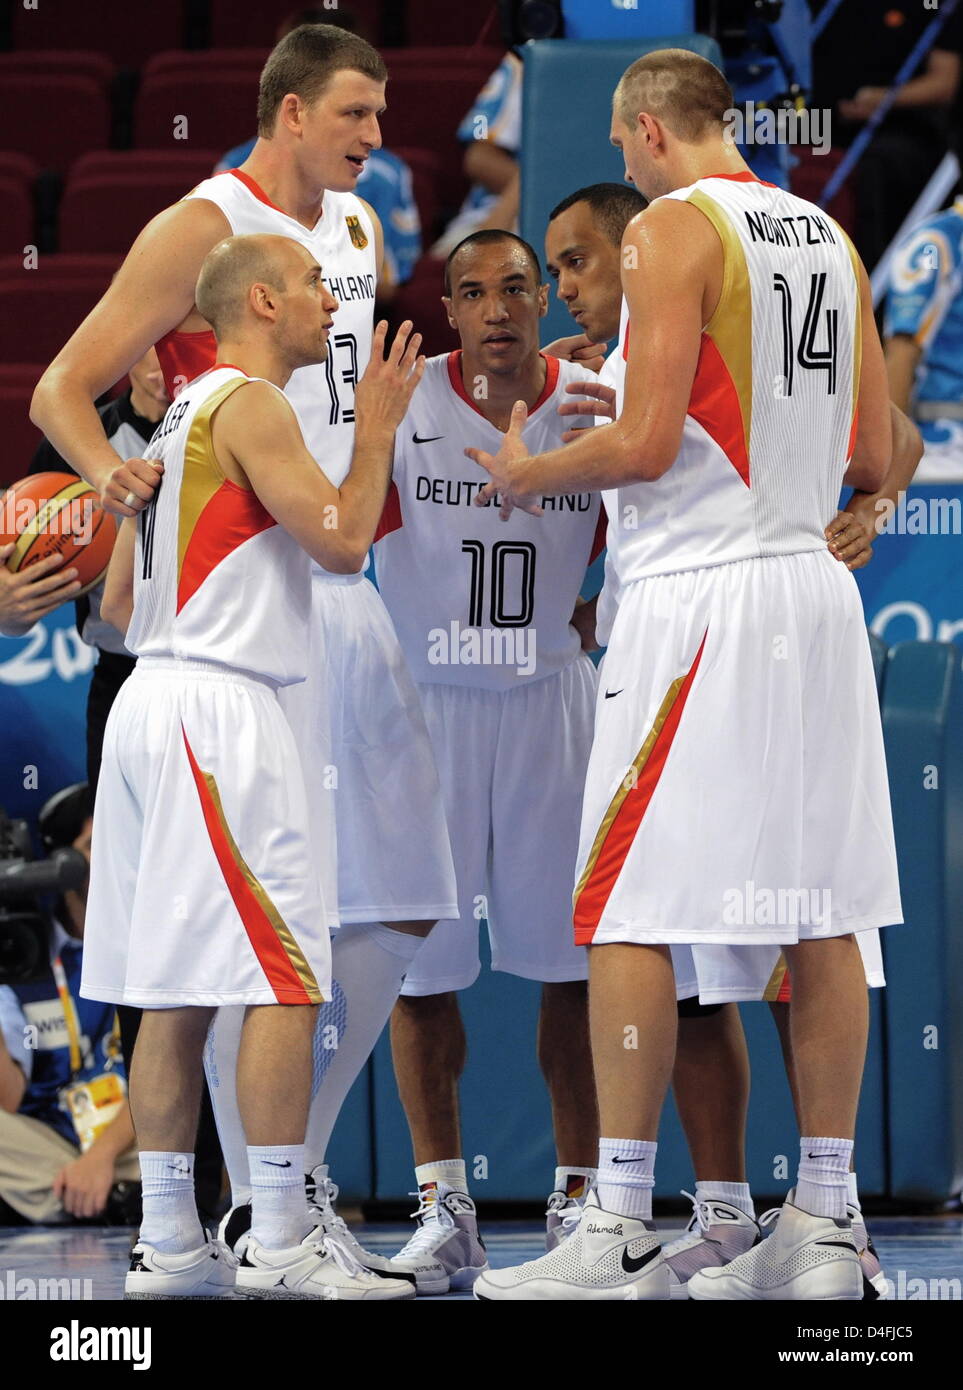 The german basketball player Pascal Roller (L-R), Patrick Femerling, Demond  Greene, Robert Garrett and Dirk Nowitzki discuss during the preliminary  round match in the menÒs basketball competition in the Olympic Basketball  Gymnasium